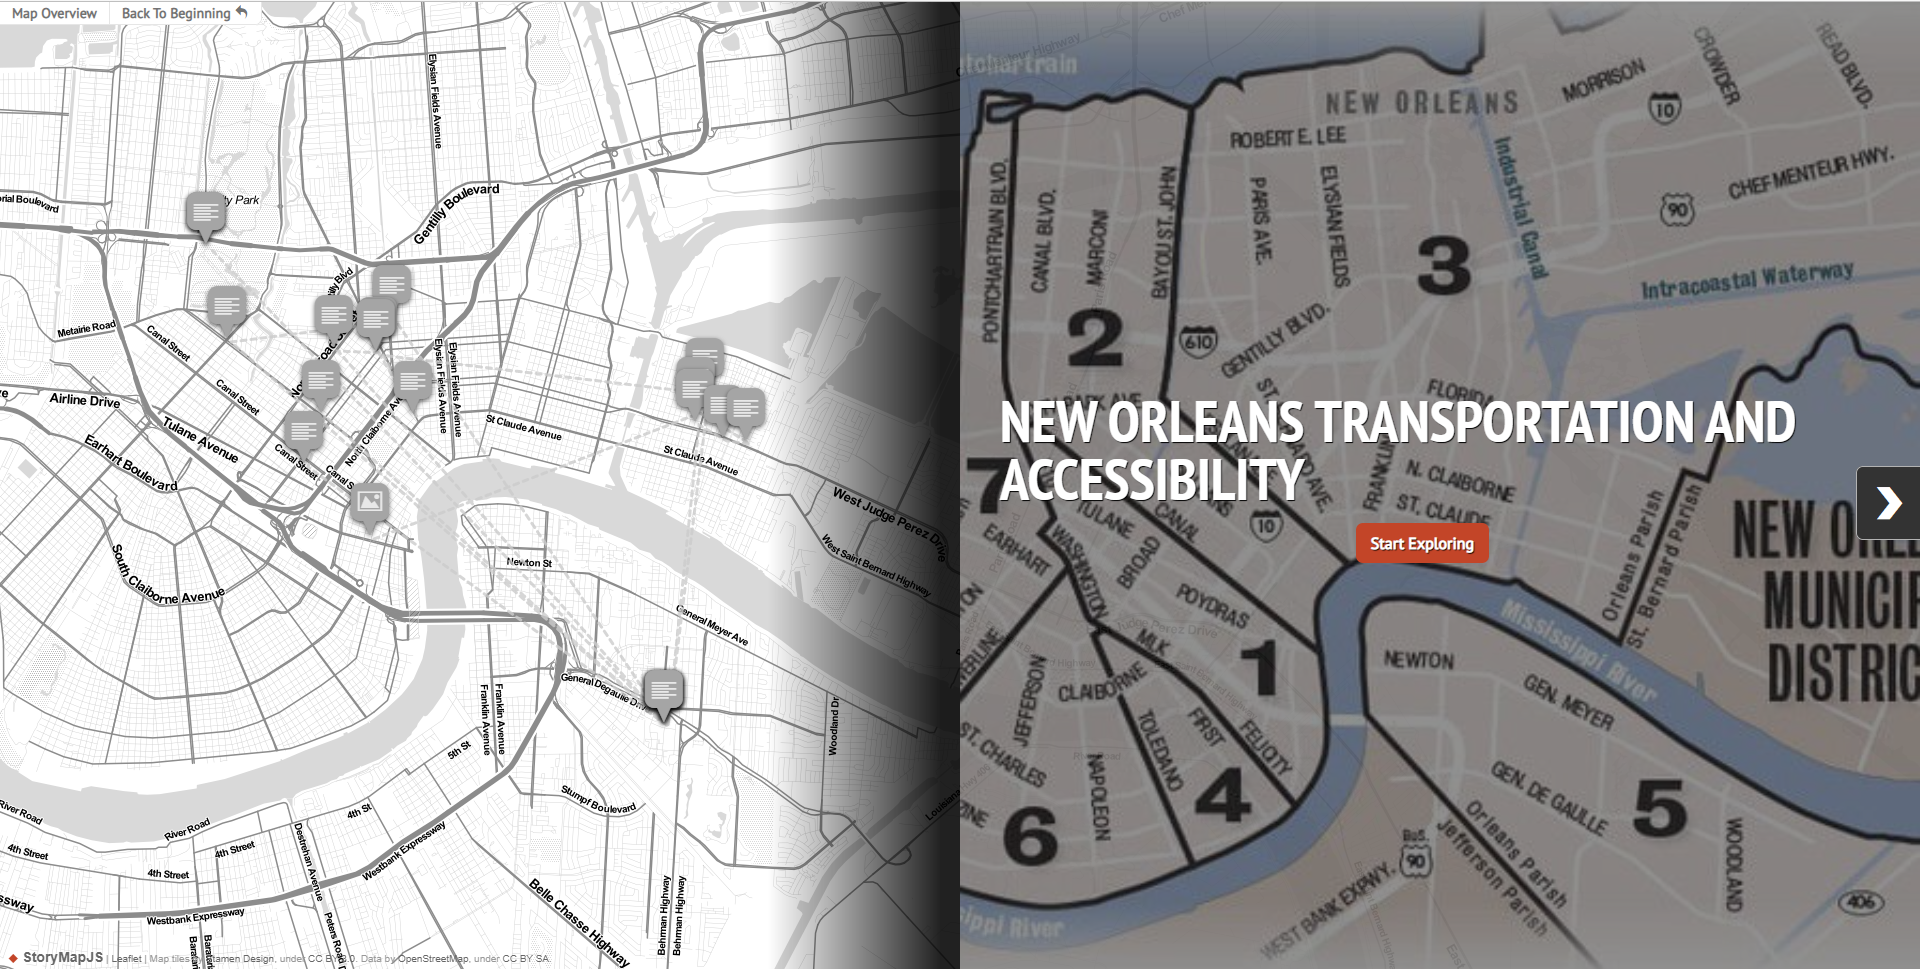 New Orleans Transportation and Accessibility